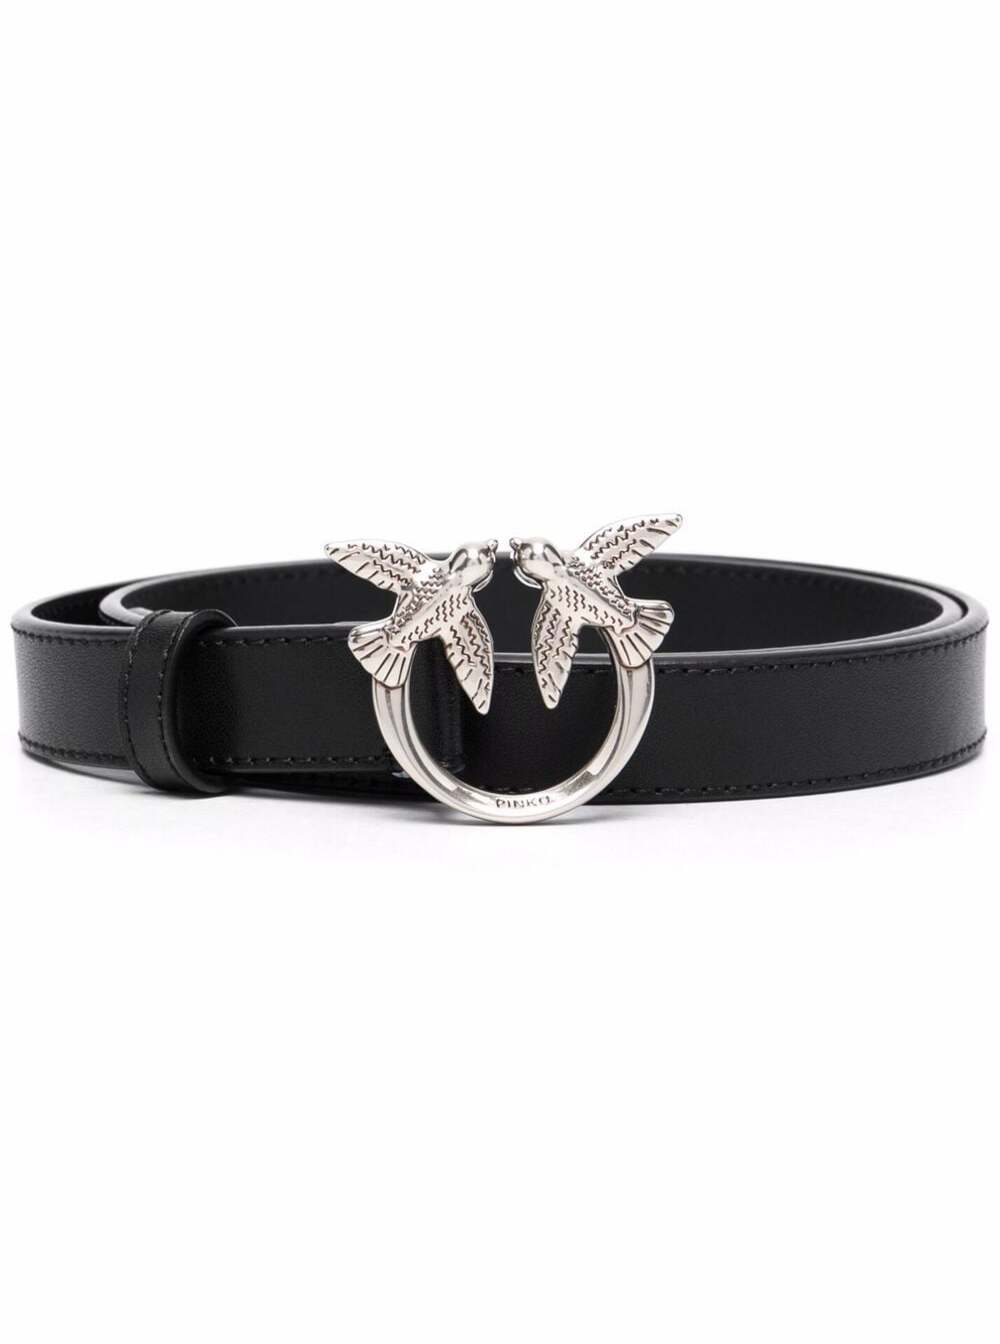 Pinko Black Leather Belt With Love Berry Buckle